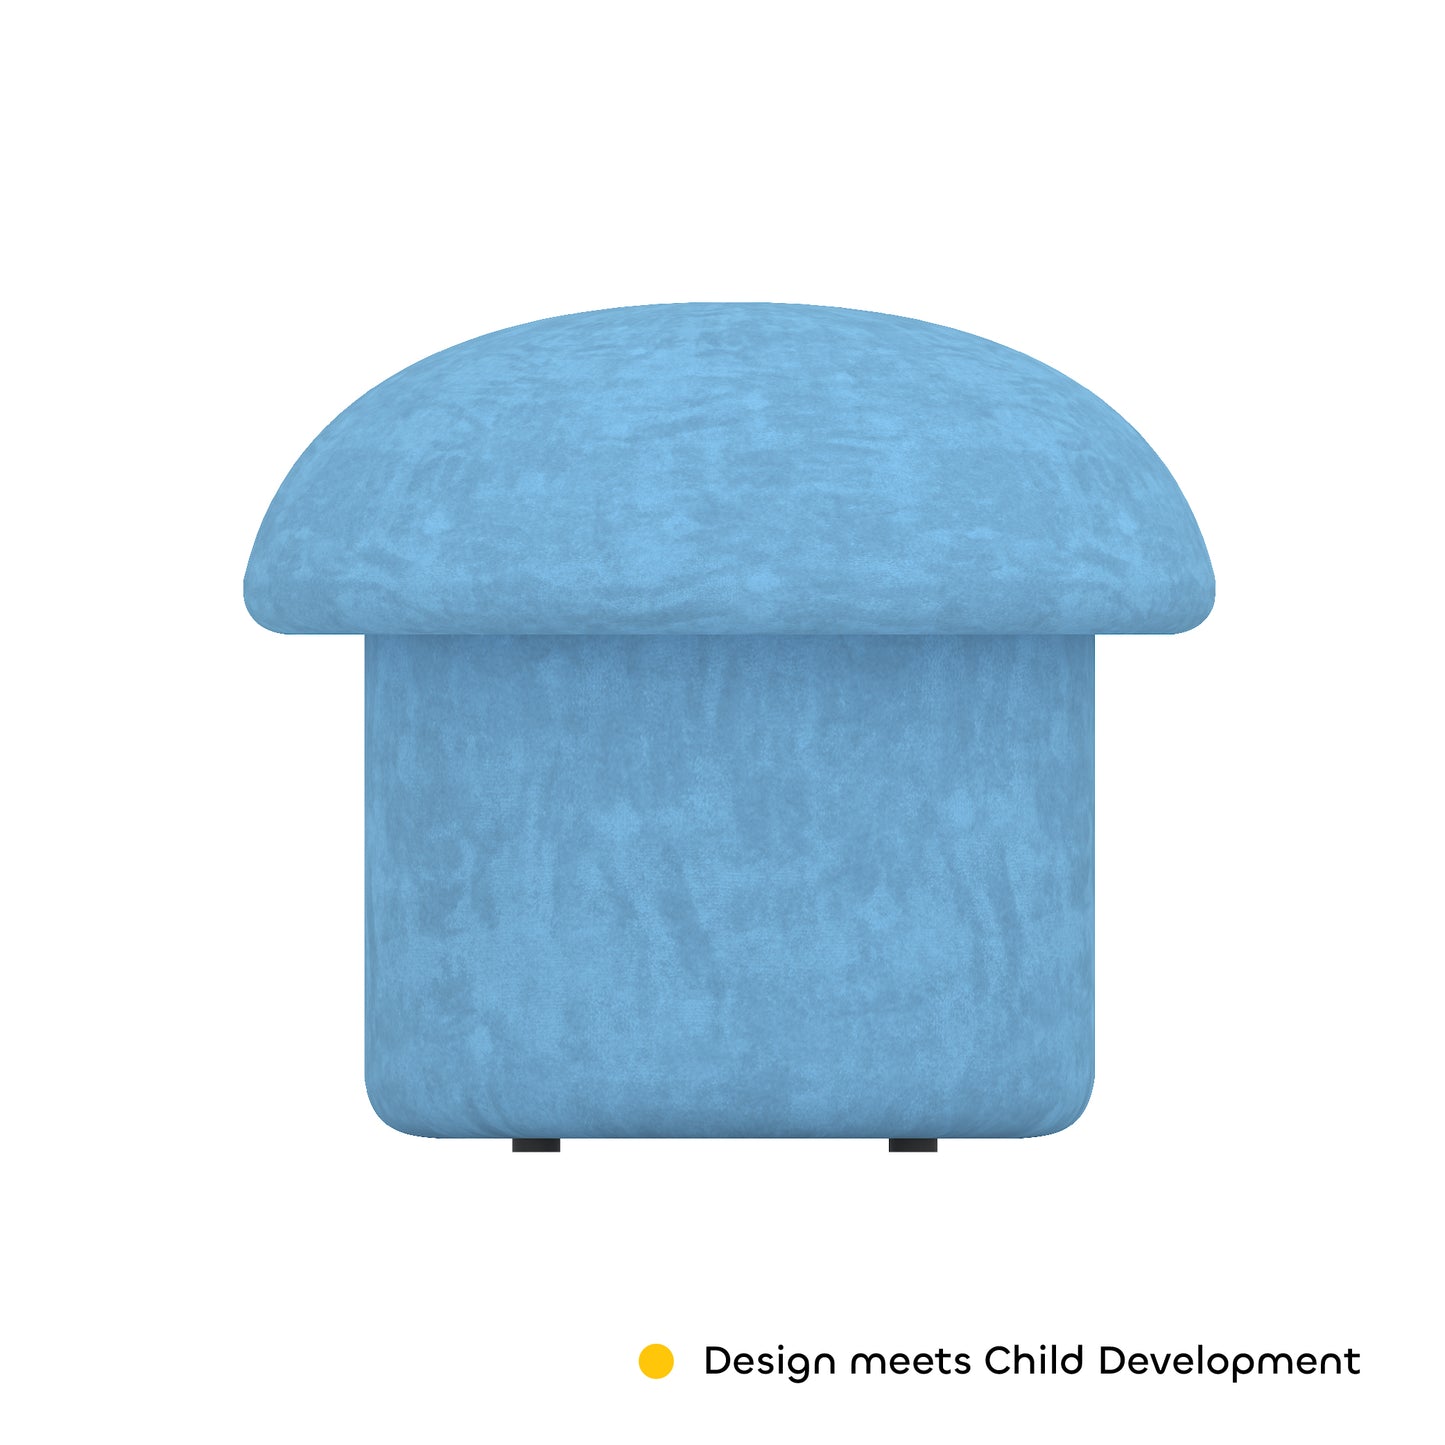 Stool for Sitting